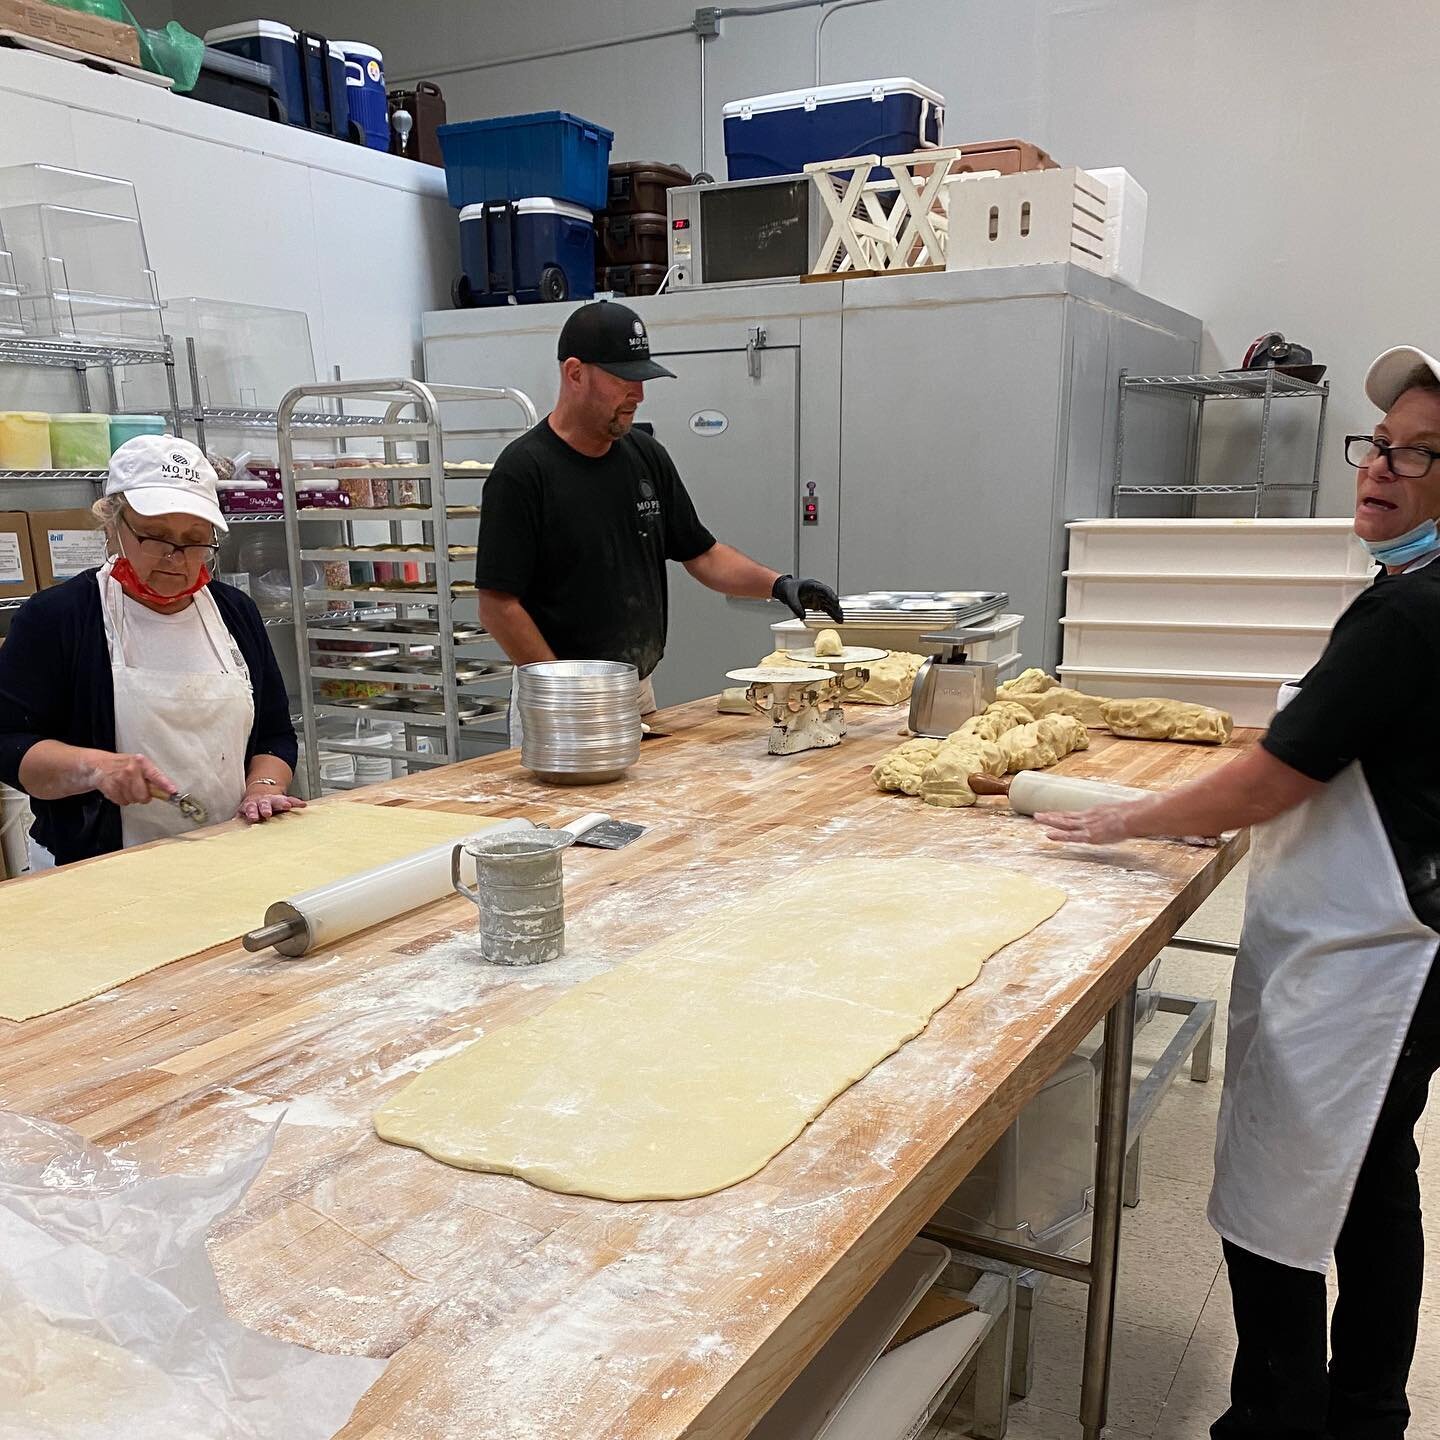 On Tuesday, we mixed 1,400 pounds of our rich flaky dough. Our bakers then worked to create handcrafted lattice tips for our homemade pies. We dare you to find a flakier crust than Mo Pie!!

#pie #localpie #MoPie #MoPieCo #asliceabove #giveMolove #gi